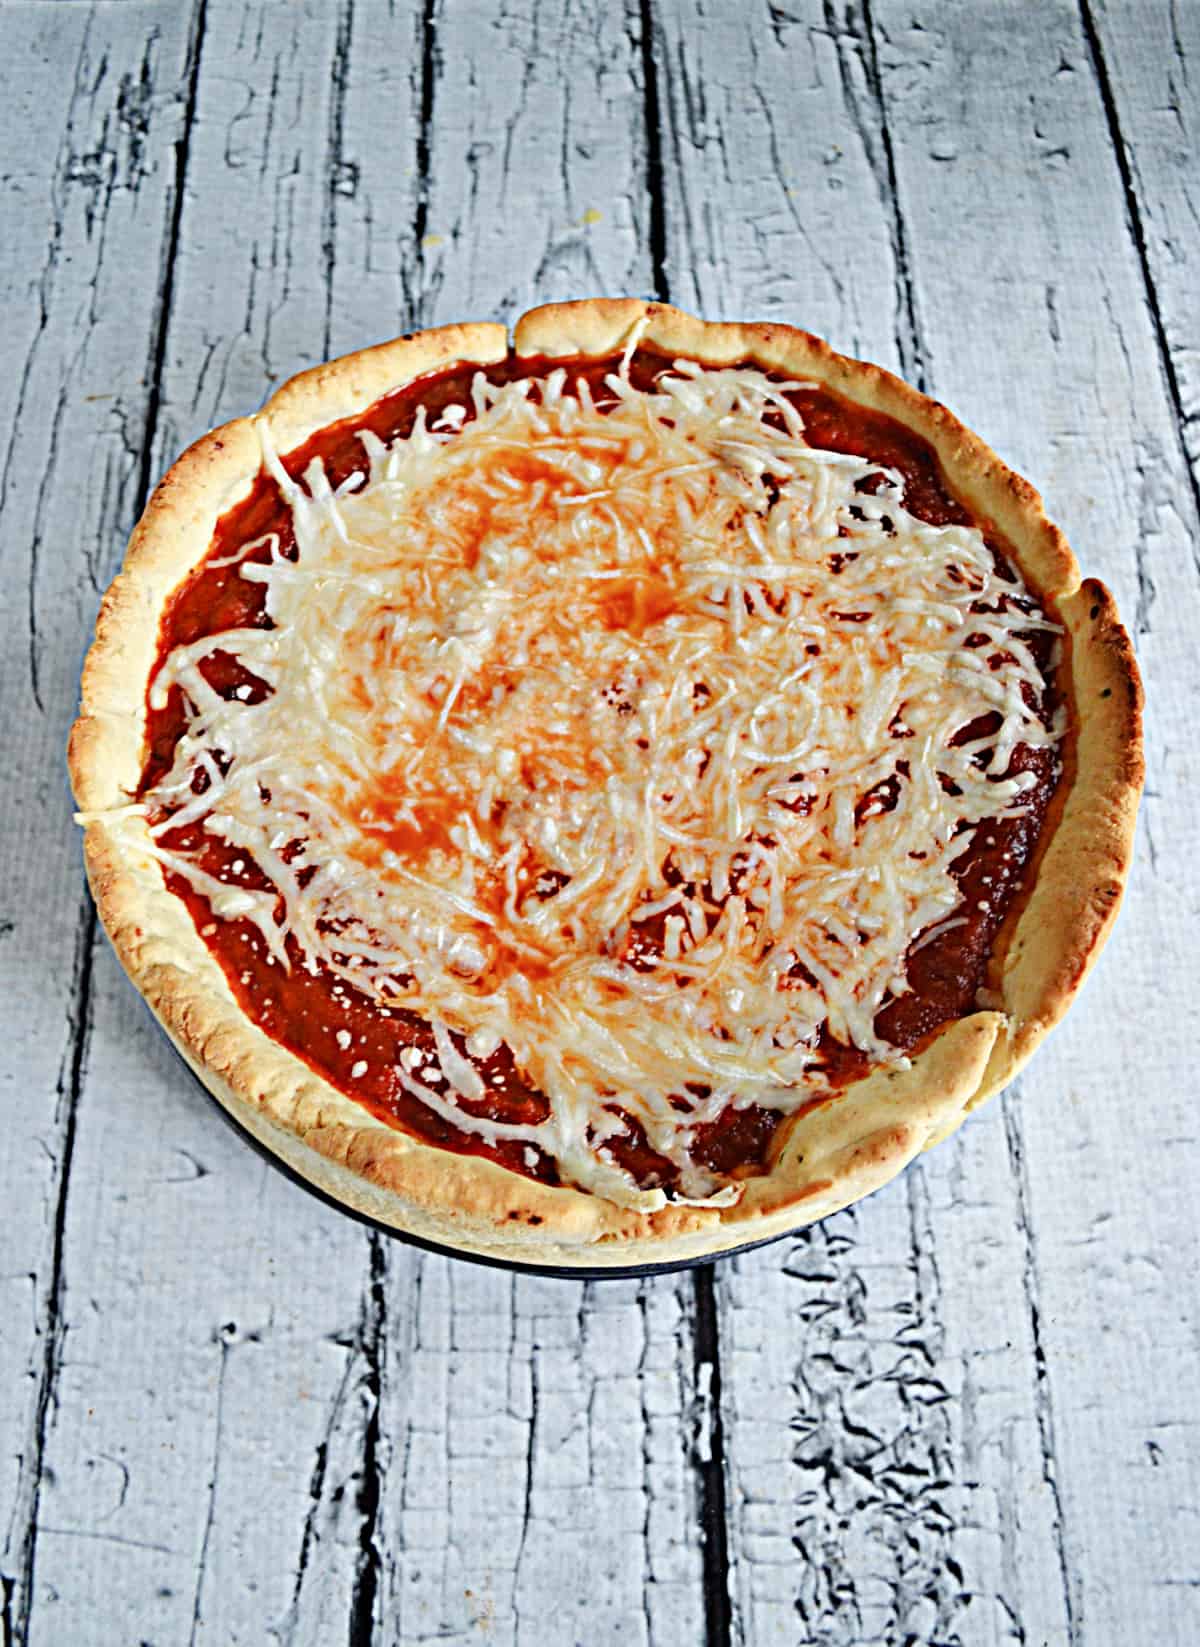 A deep dish pizza with golden crust, plenty of sauce, and a sprinkle of cheese on top.